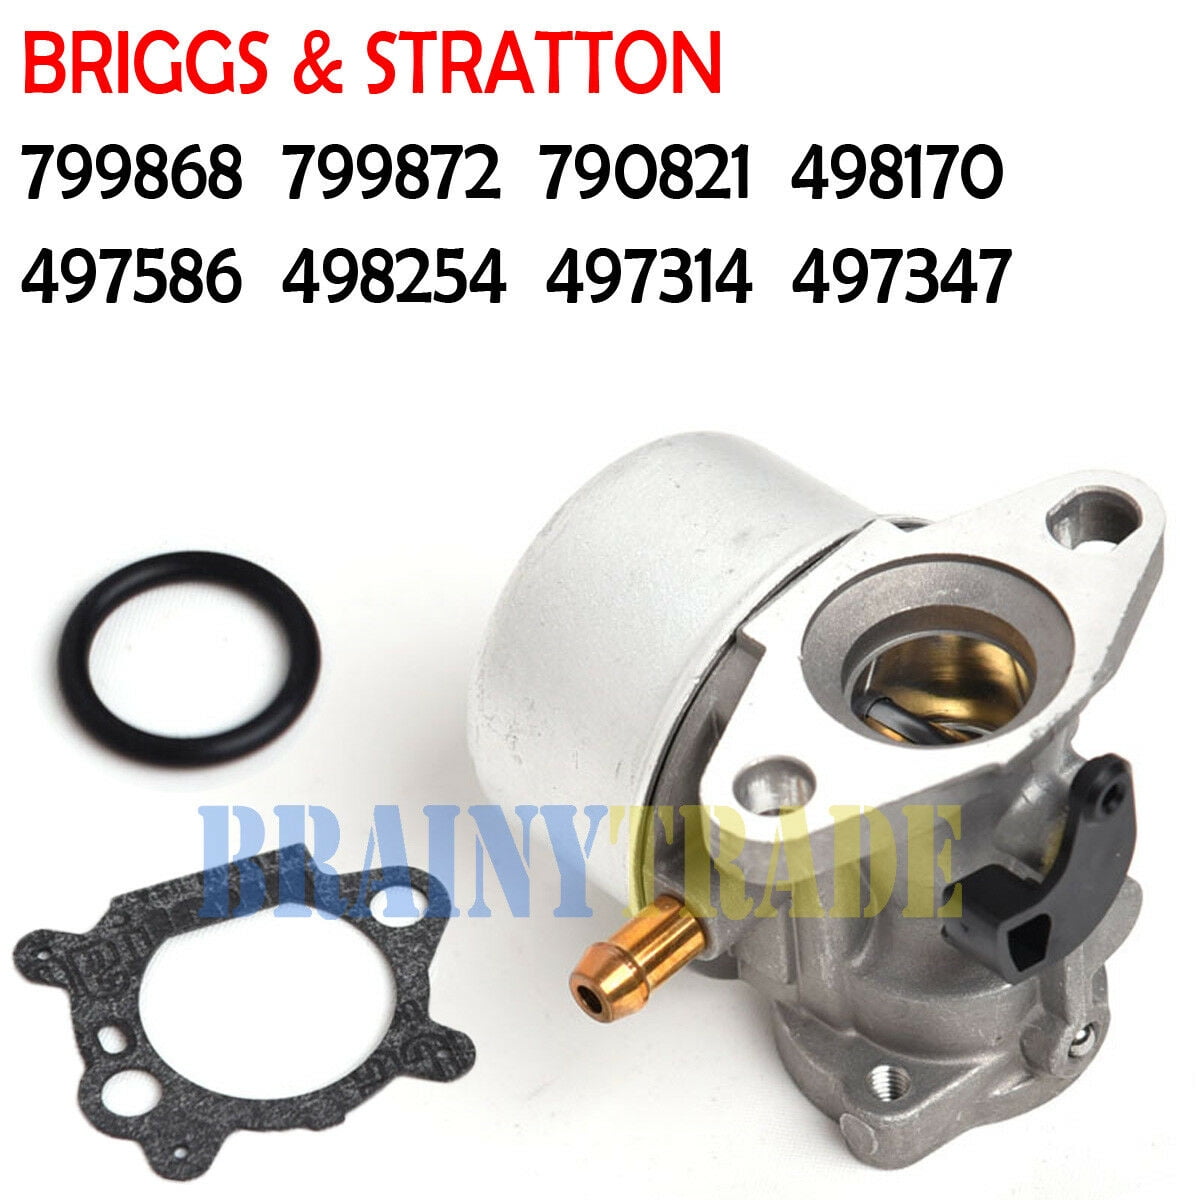 YILE 799868 498170 799872 Briggs & Stratton Carburetor for Spark Plugs with Air Filters Suitable for Equipment Lawn Mowers 